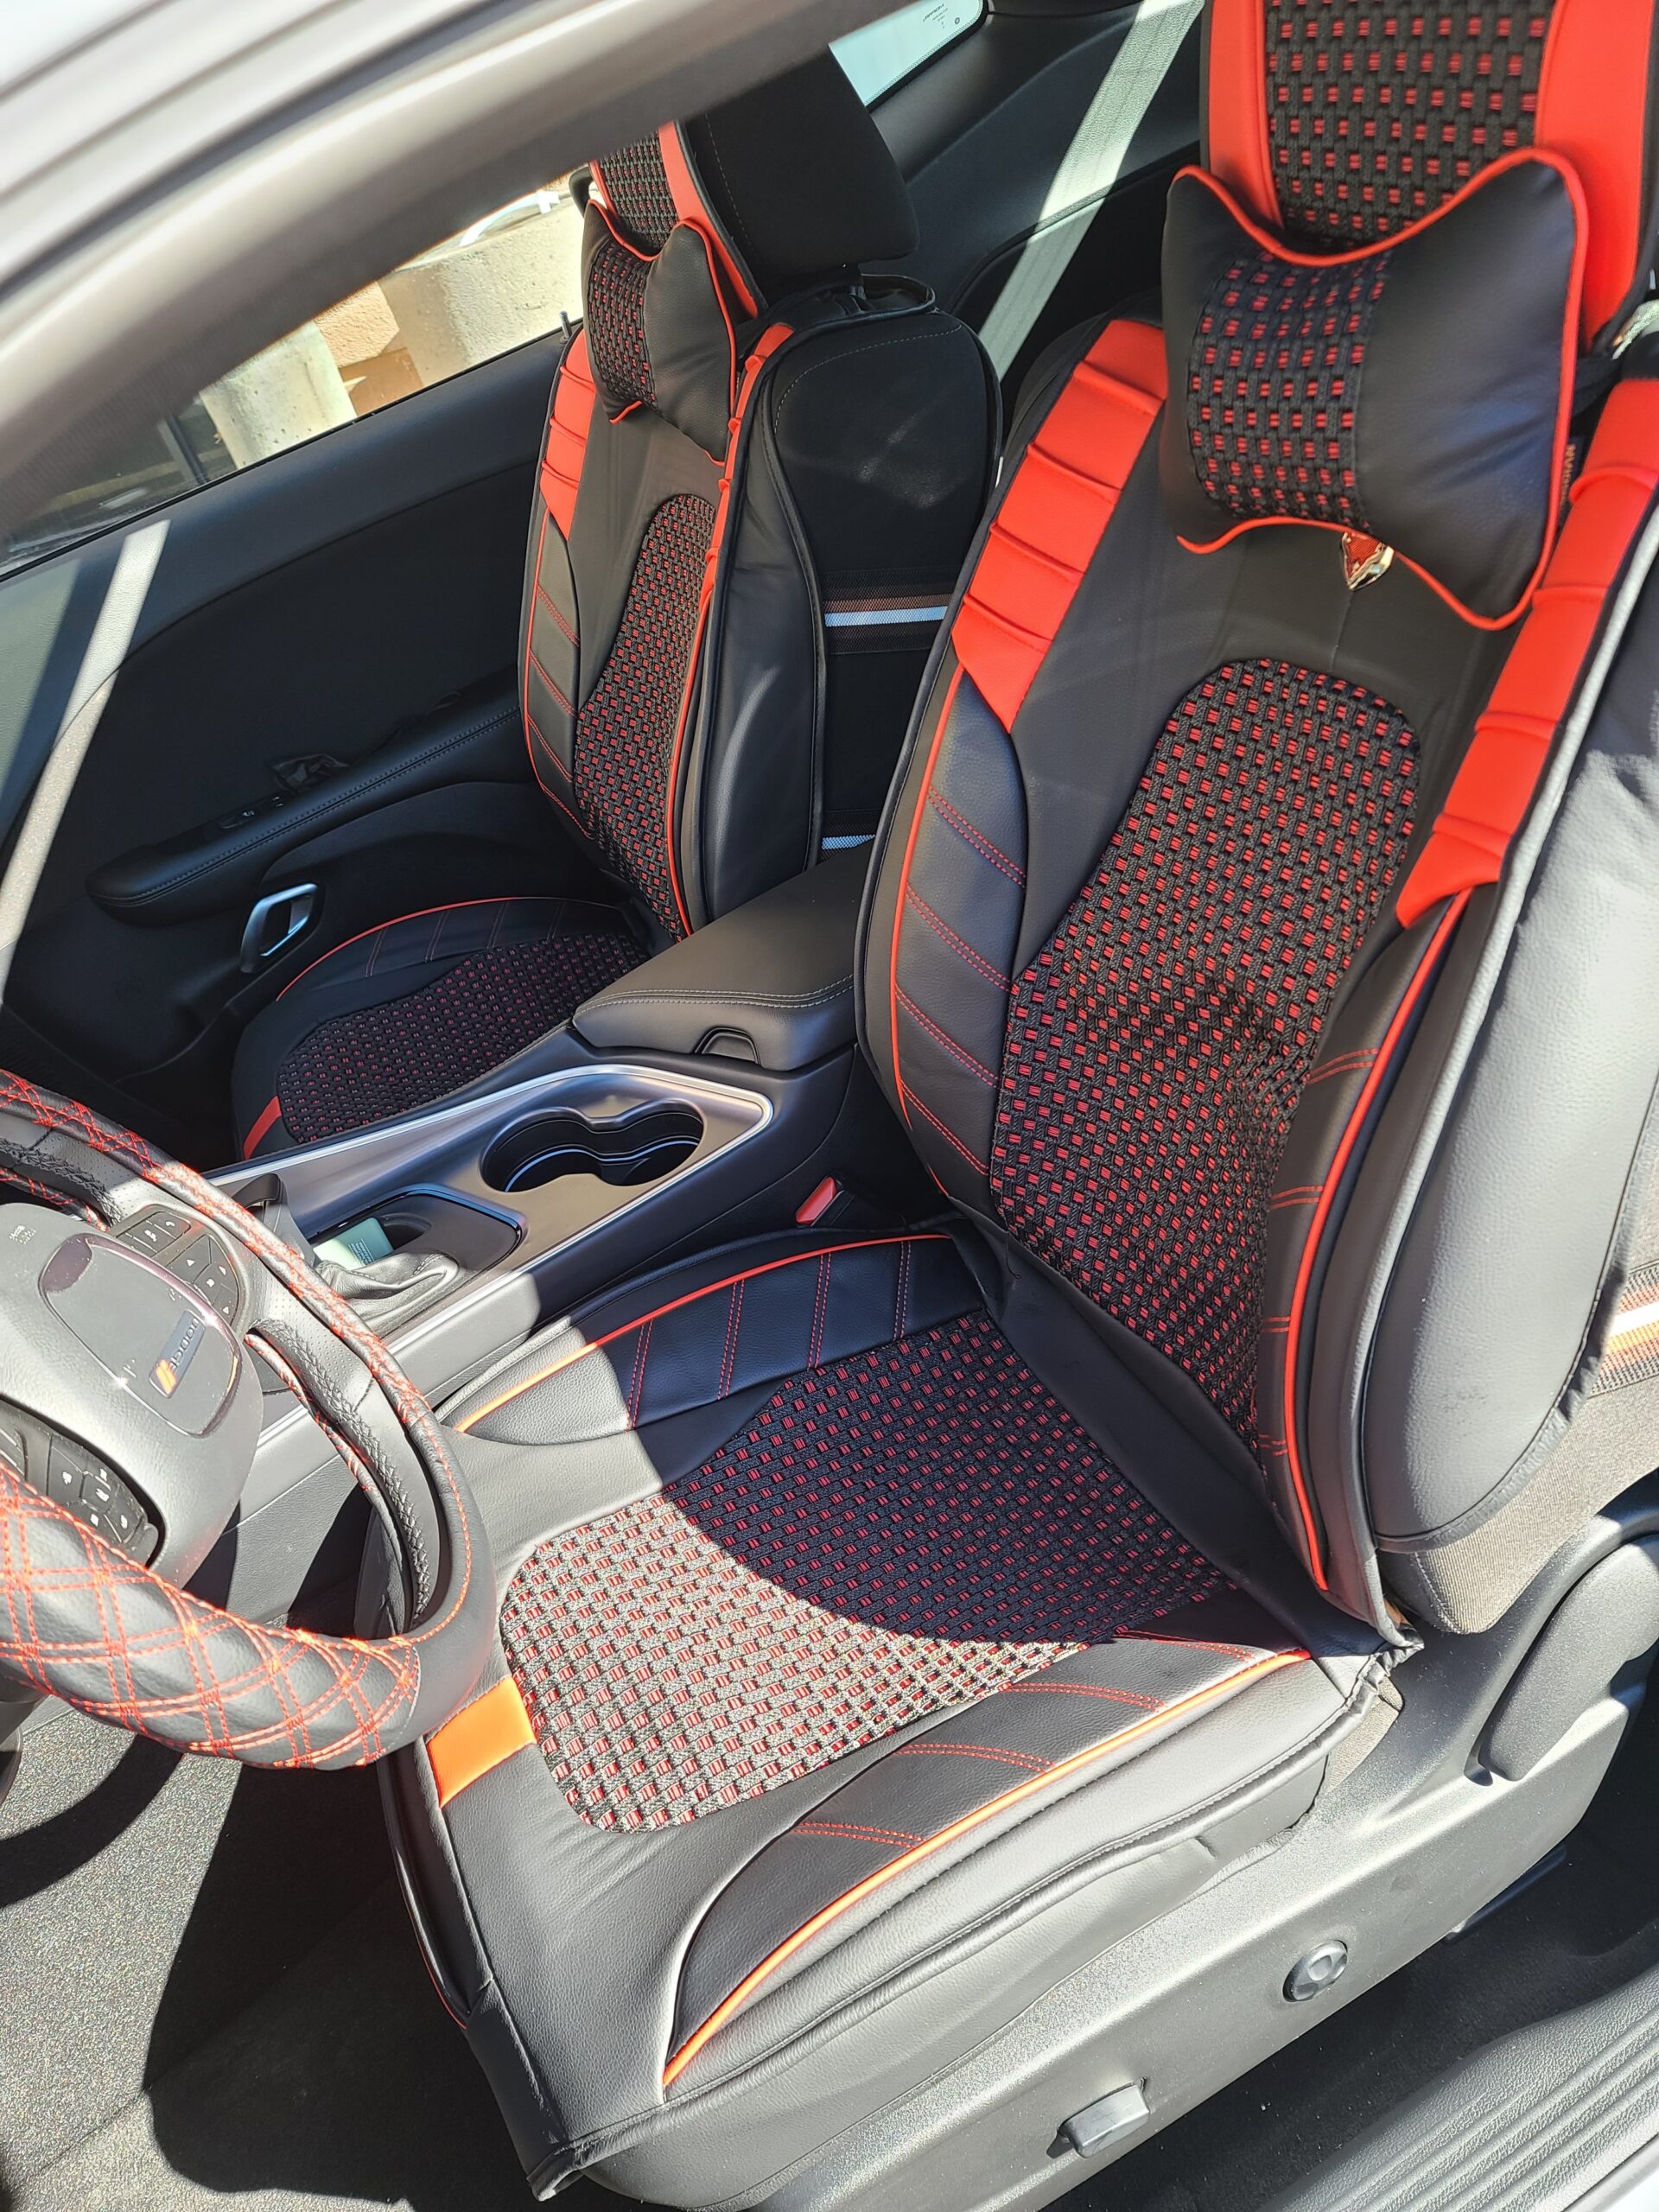 2019 Dodge Challenger Seat Cover Installed – Car Seat Cover and Custom